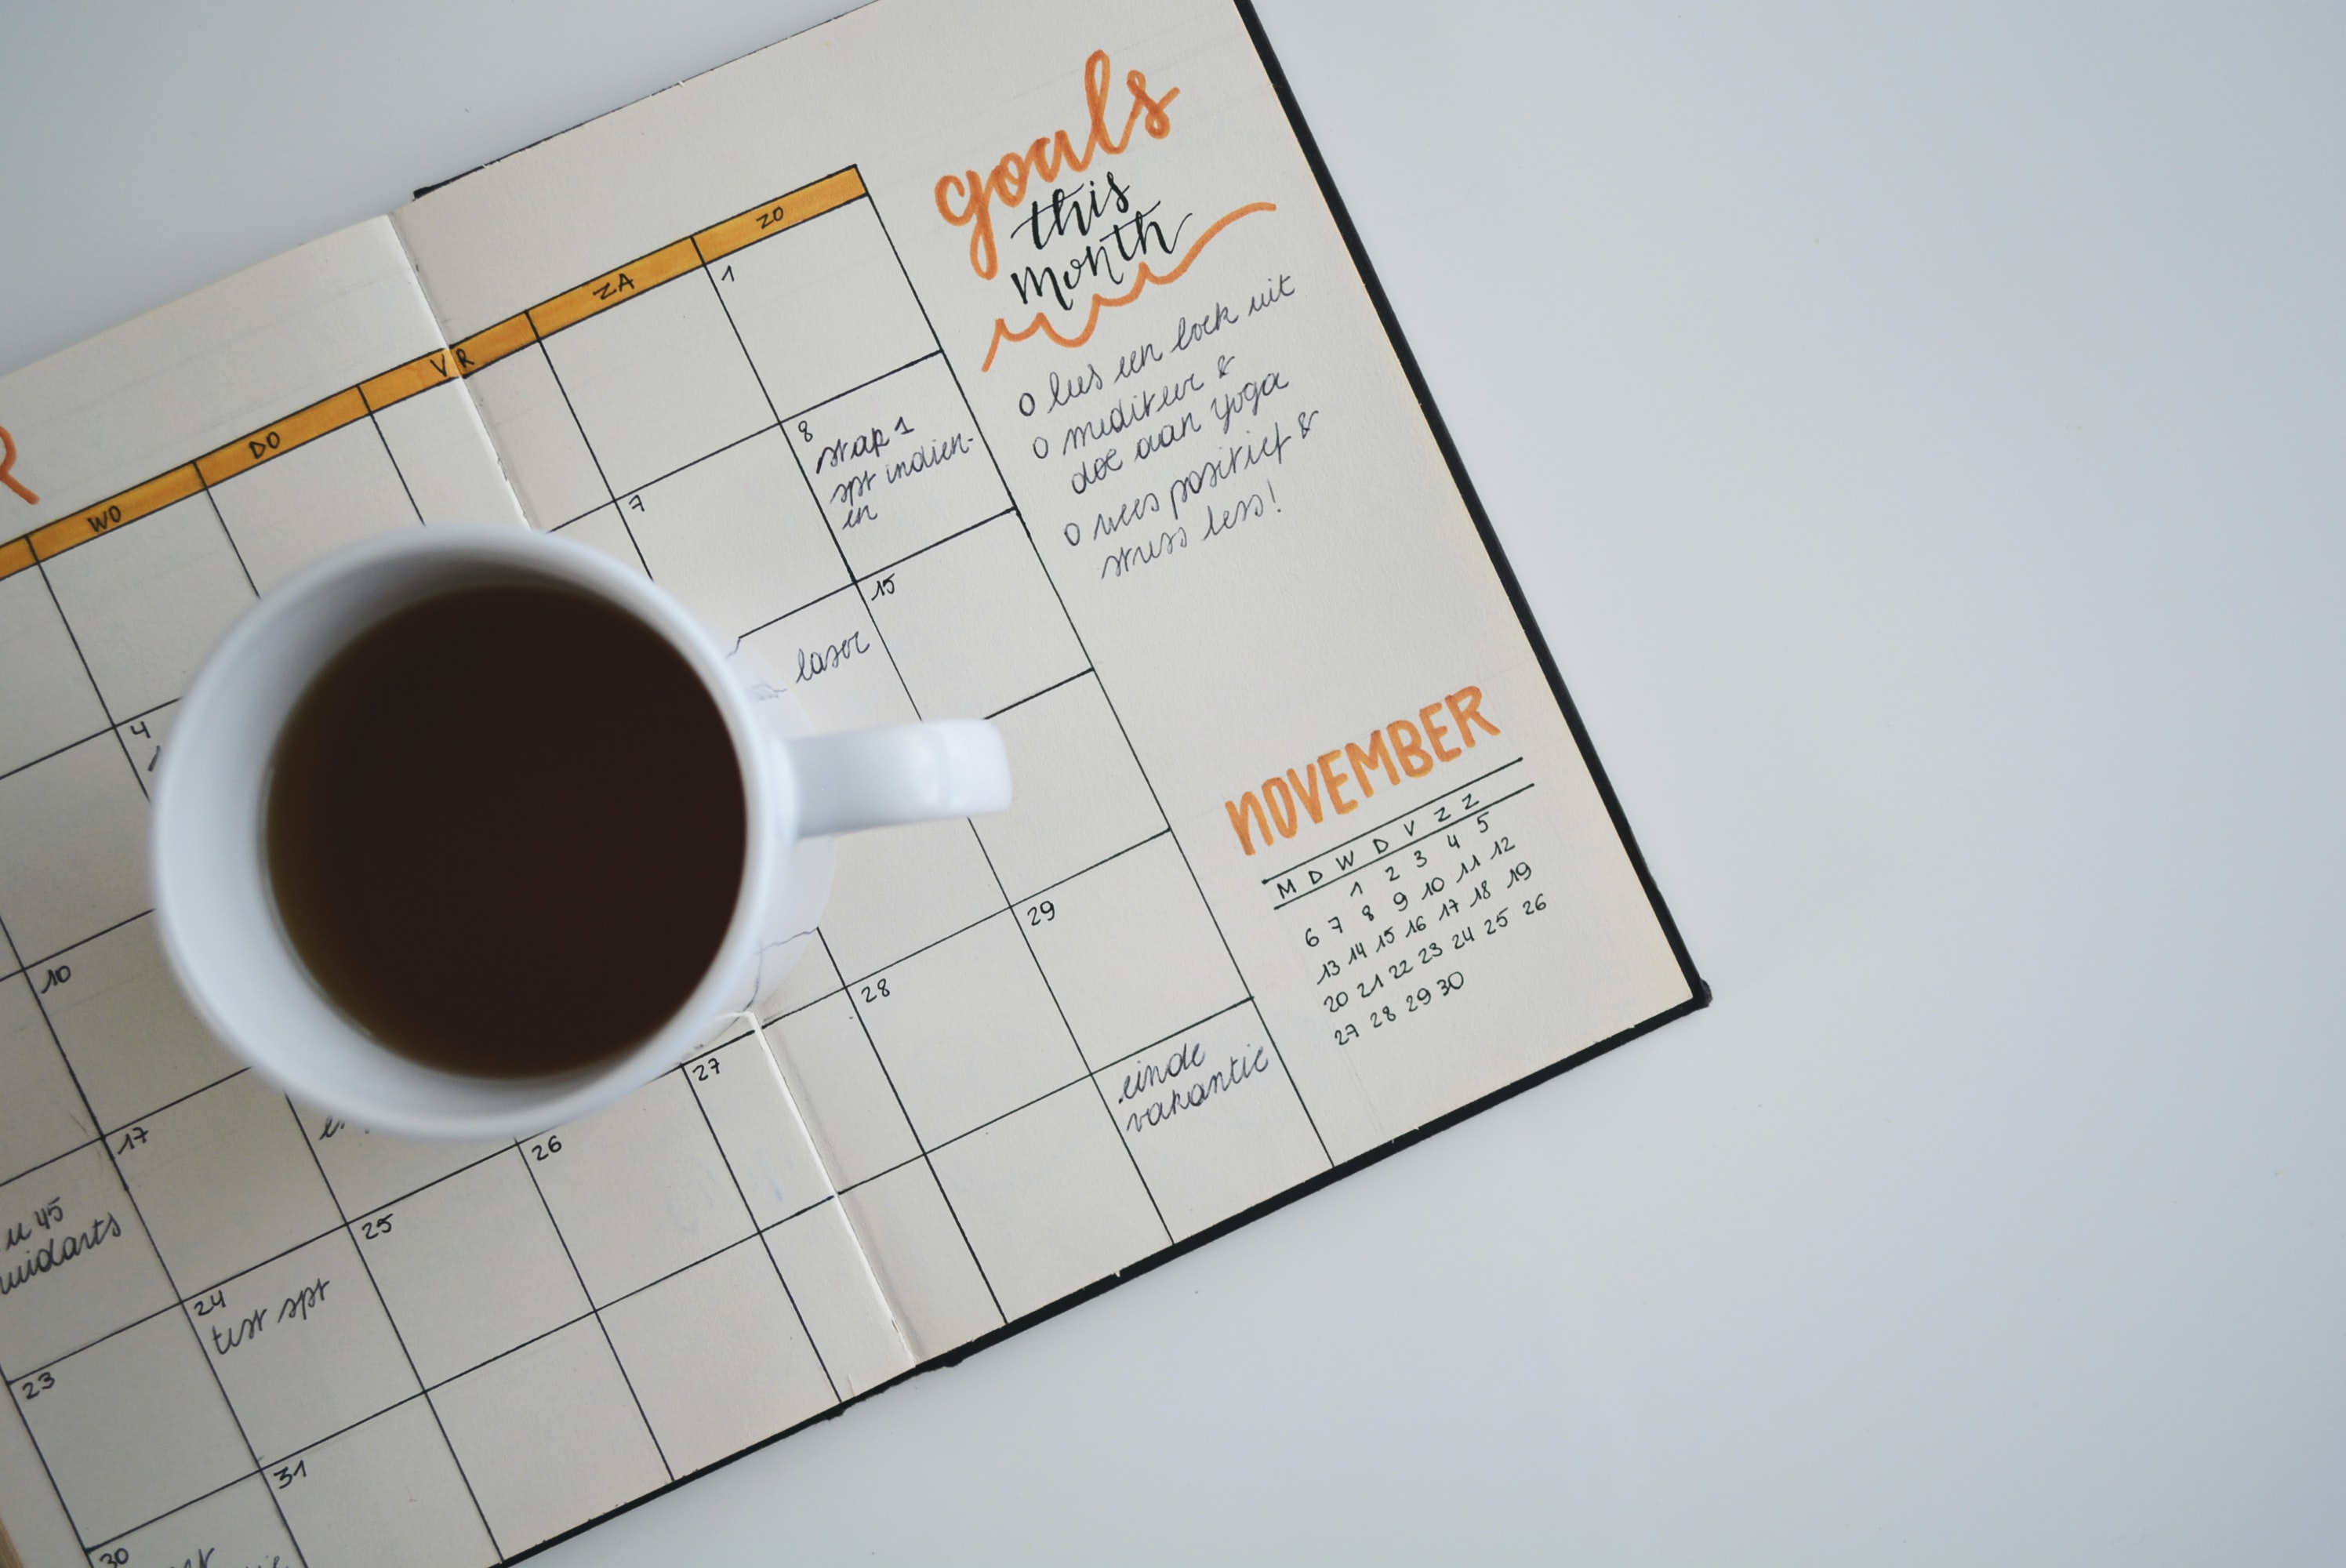 A mug placed on a calendar showing the goals for the month